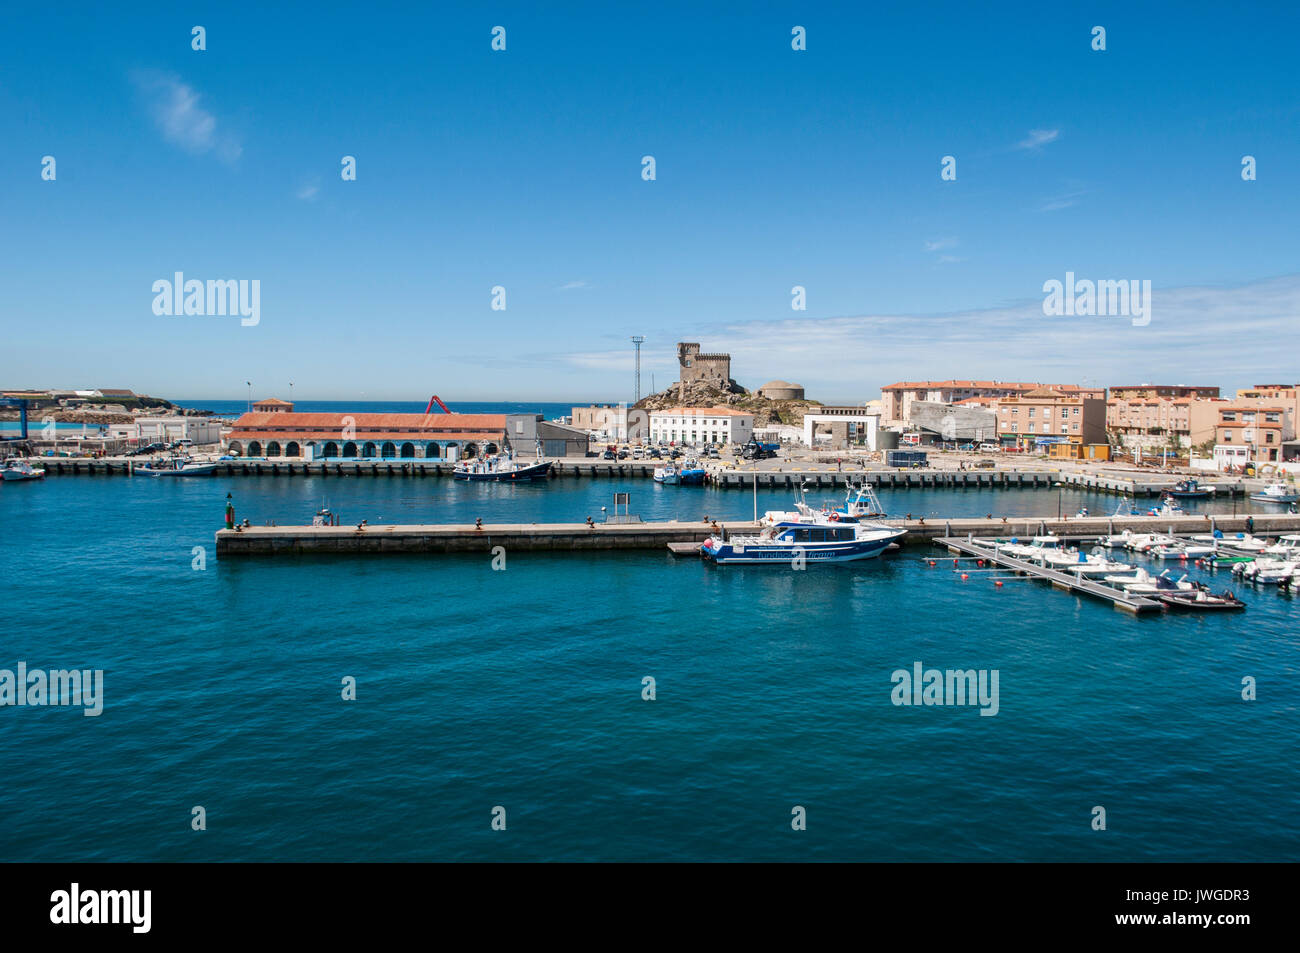 The port of Tarifa seen from the Strait of Gibraltar that connects Spain to Morocco, stretch of sea that joins Atlantic Ocean to Mediterranean Sea Stock Photo